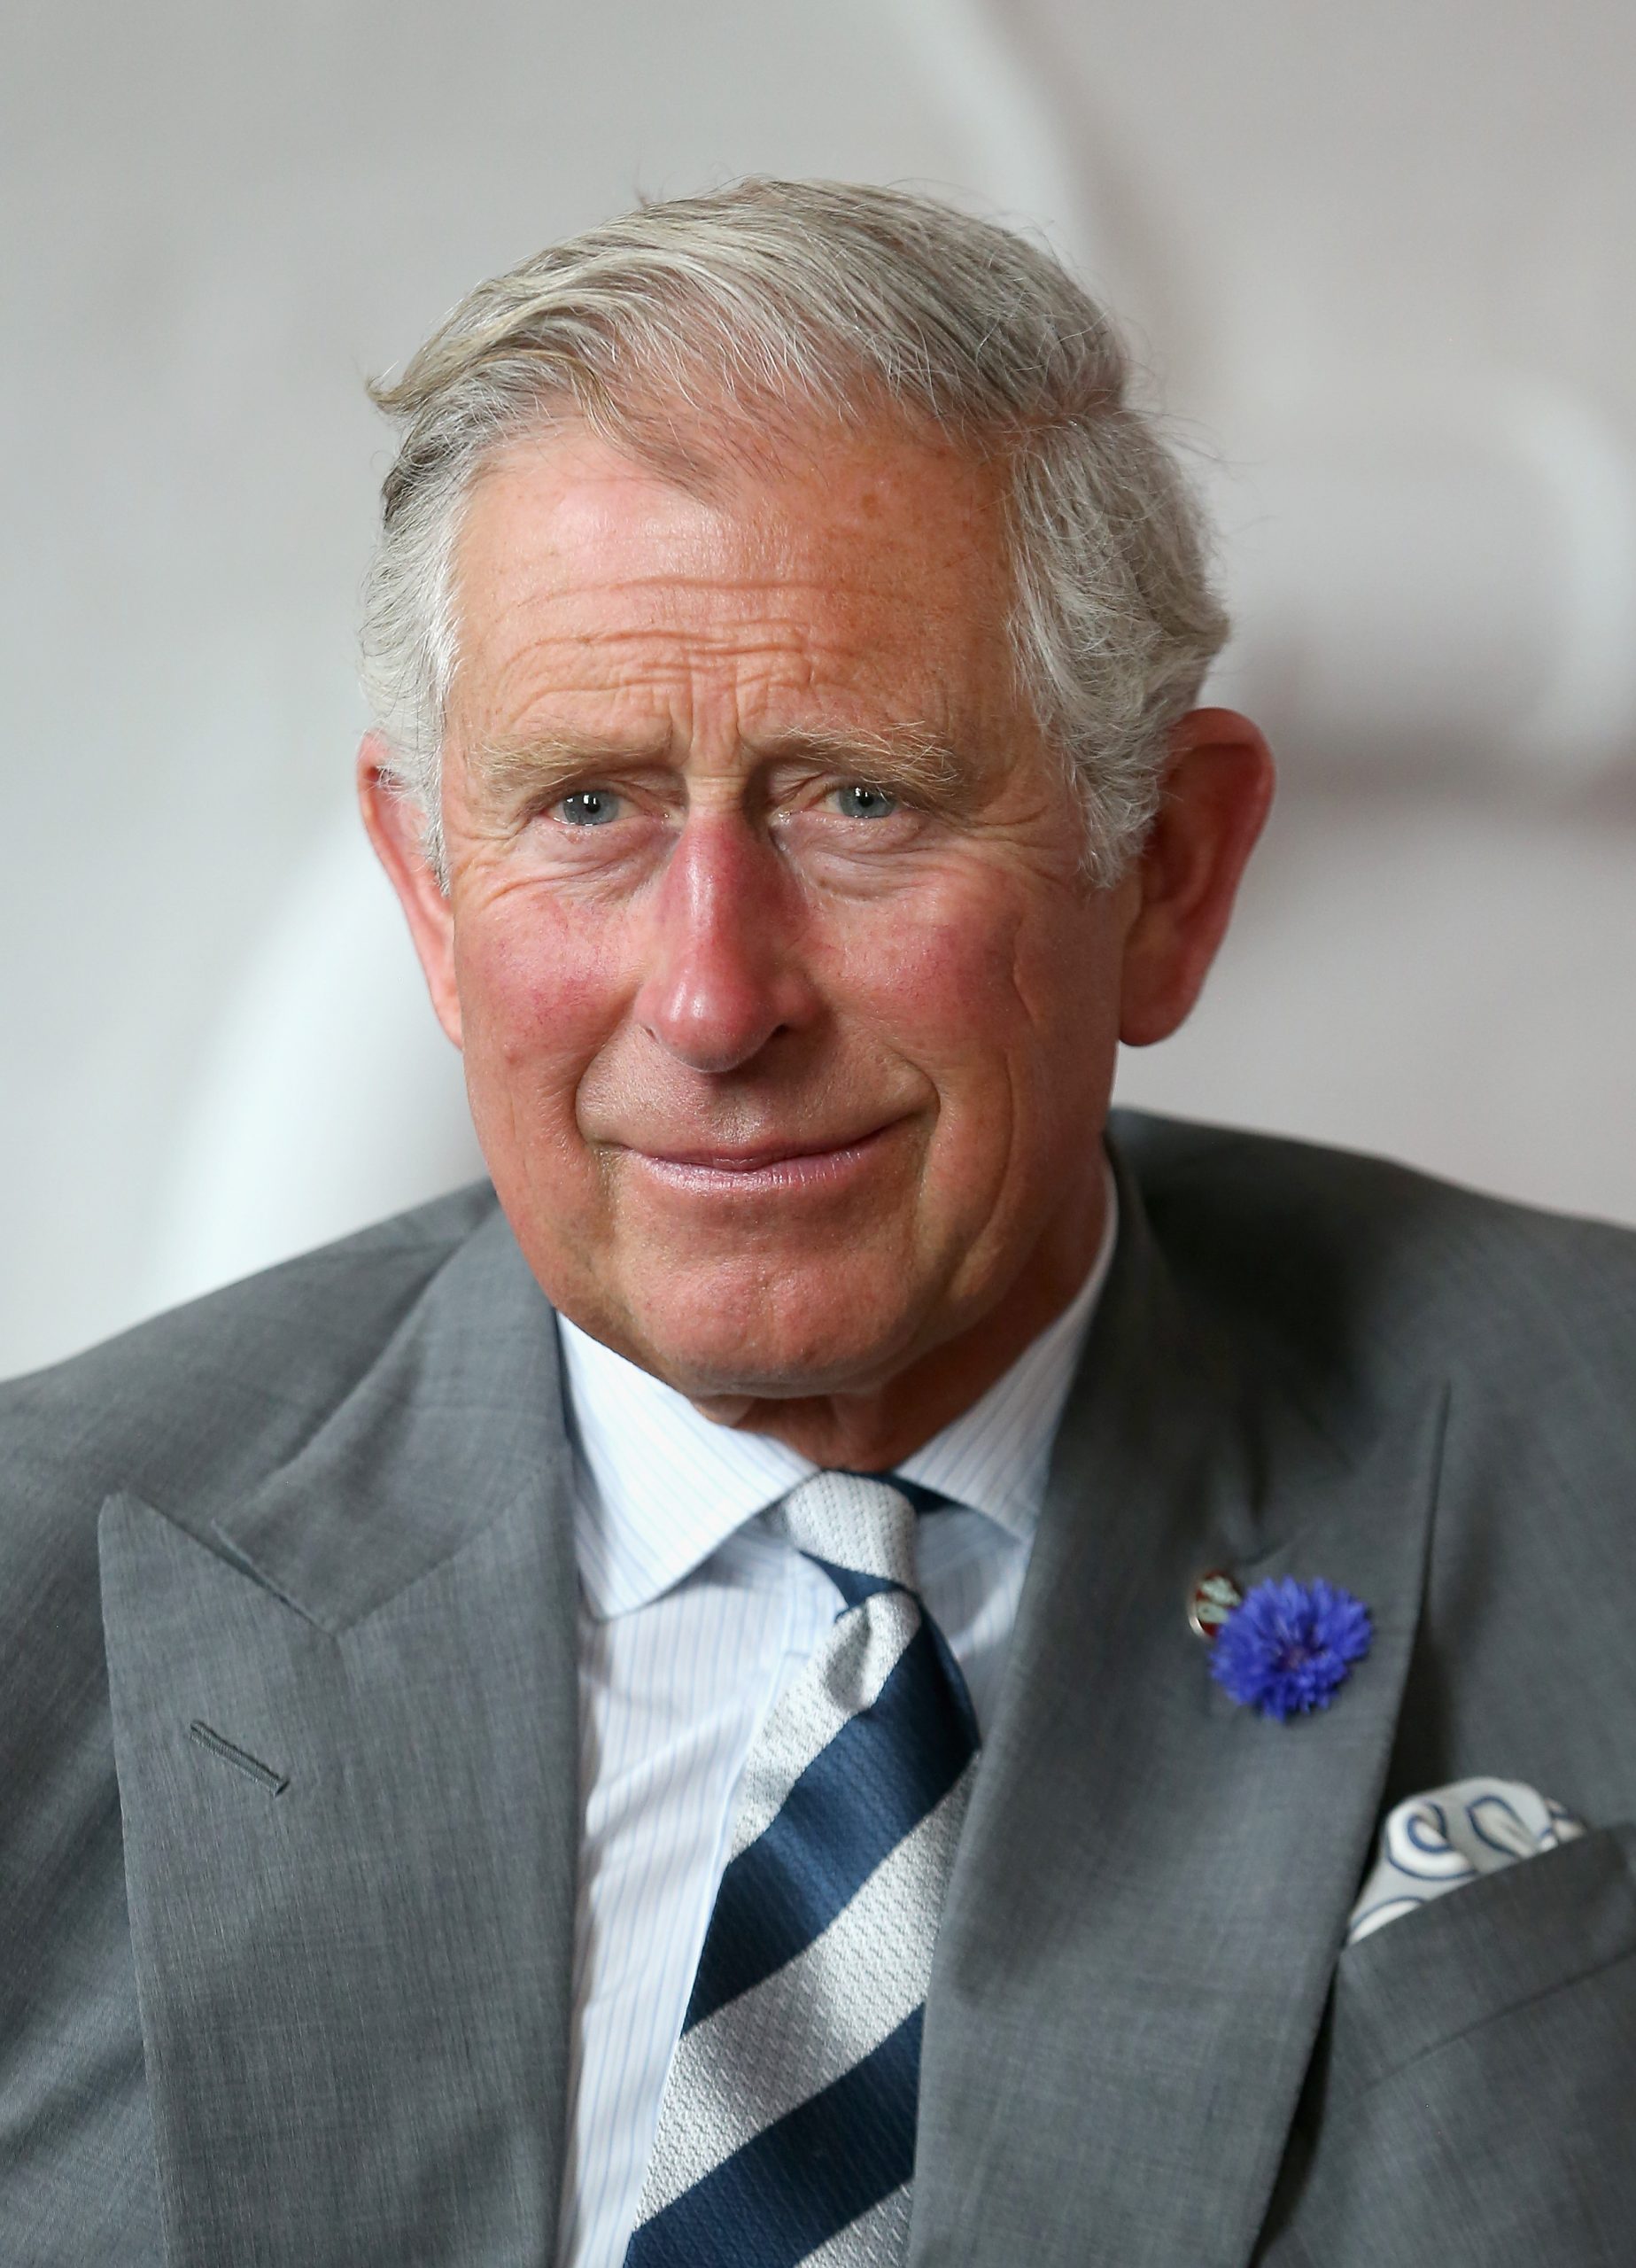 Prince Charles rules London developments claims Richard Rogers ...